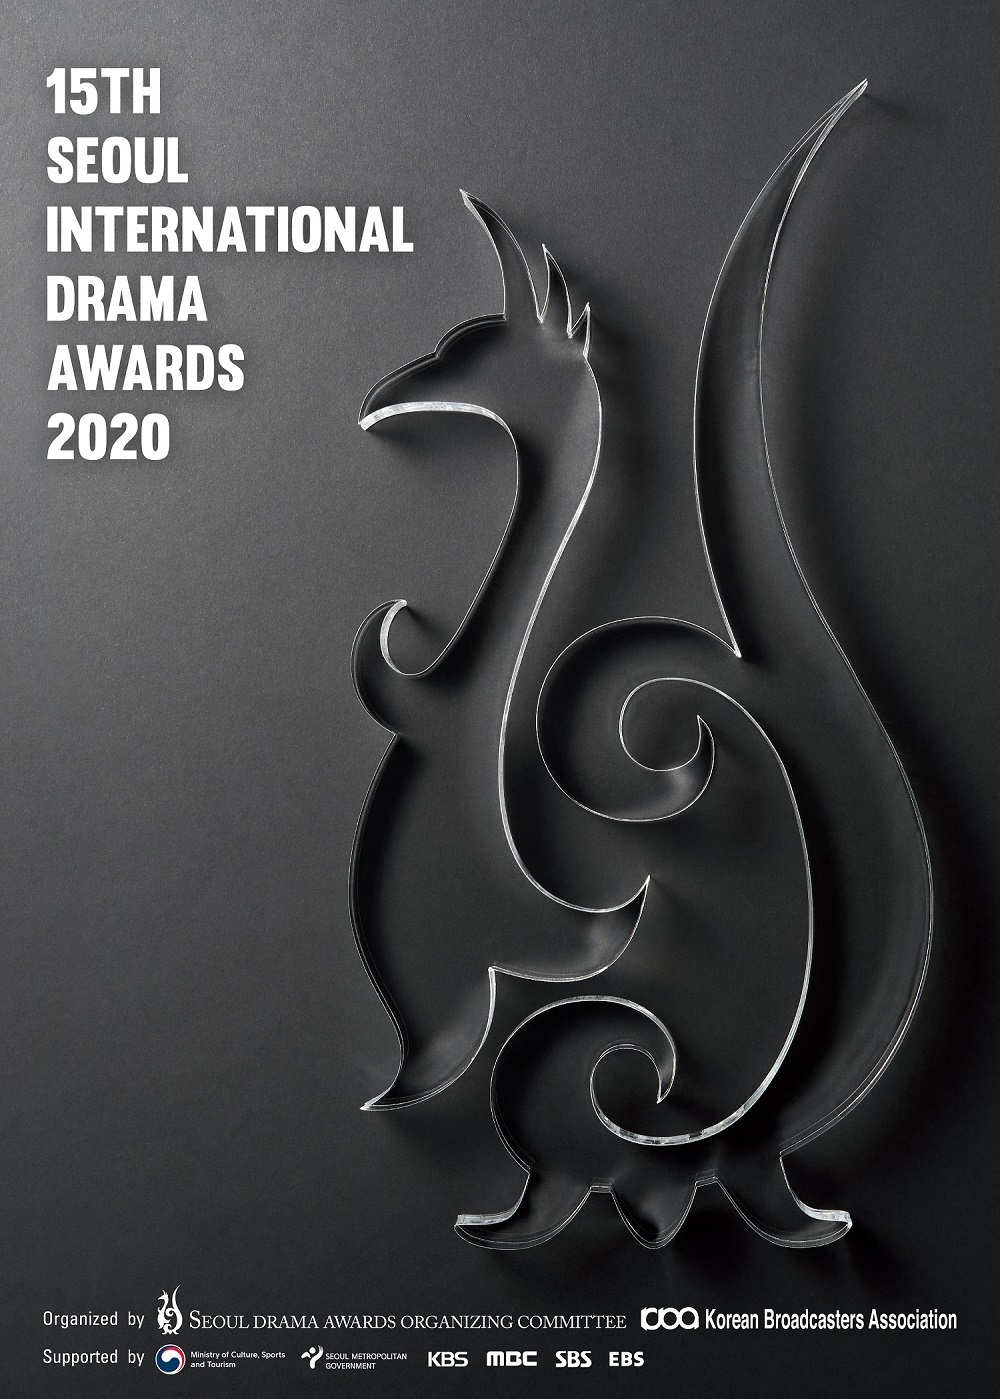 The 15th Seoul International Drama Awards poster (Courtesy to the organizing committee)